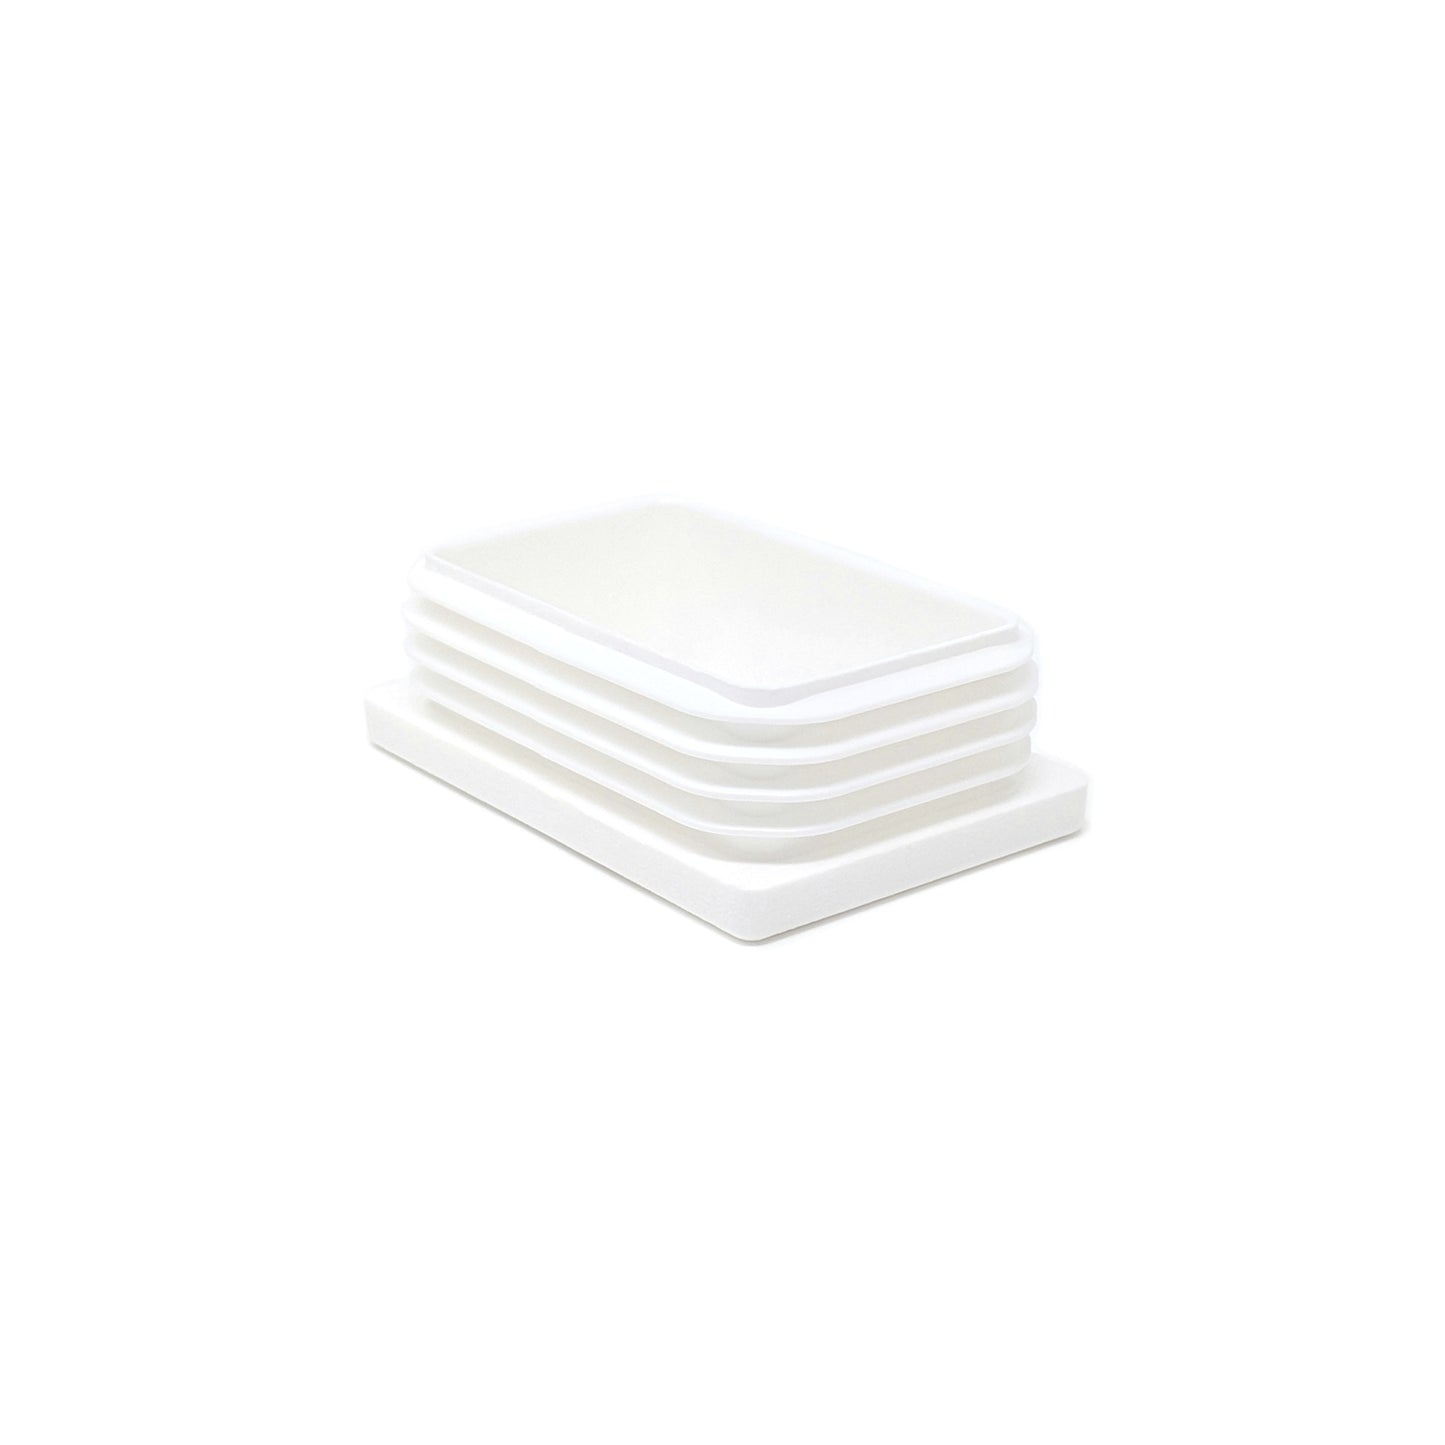 Rectangular Tube Inserts 60mm x 40mm White | Made in Germany | Keay Vital Parts